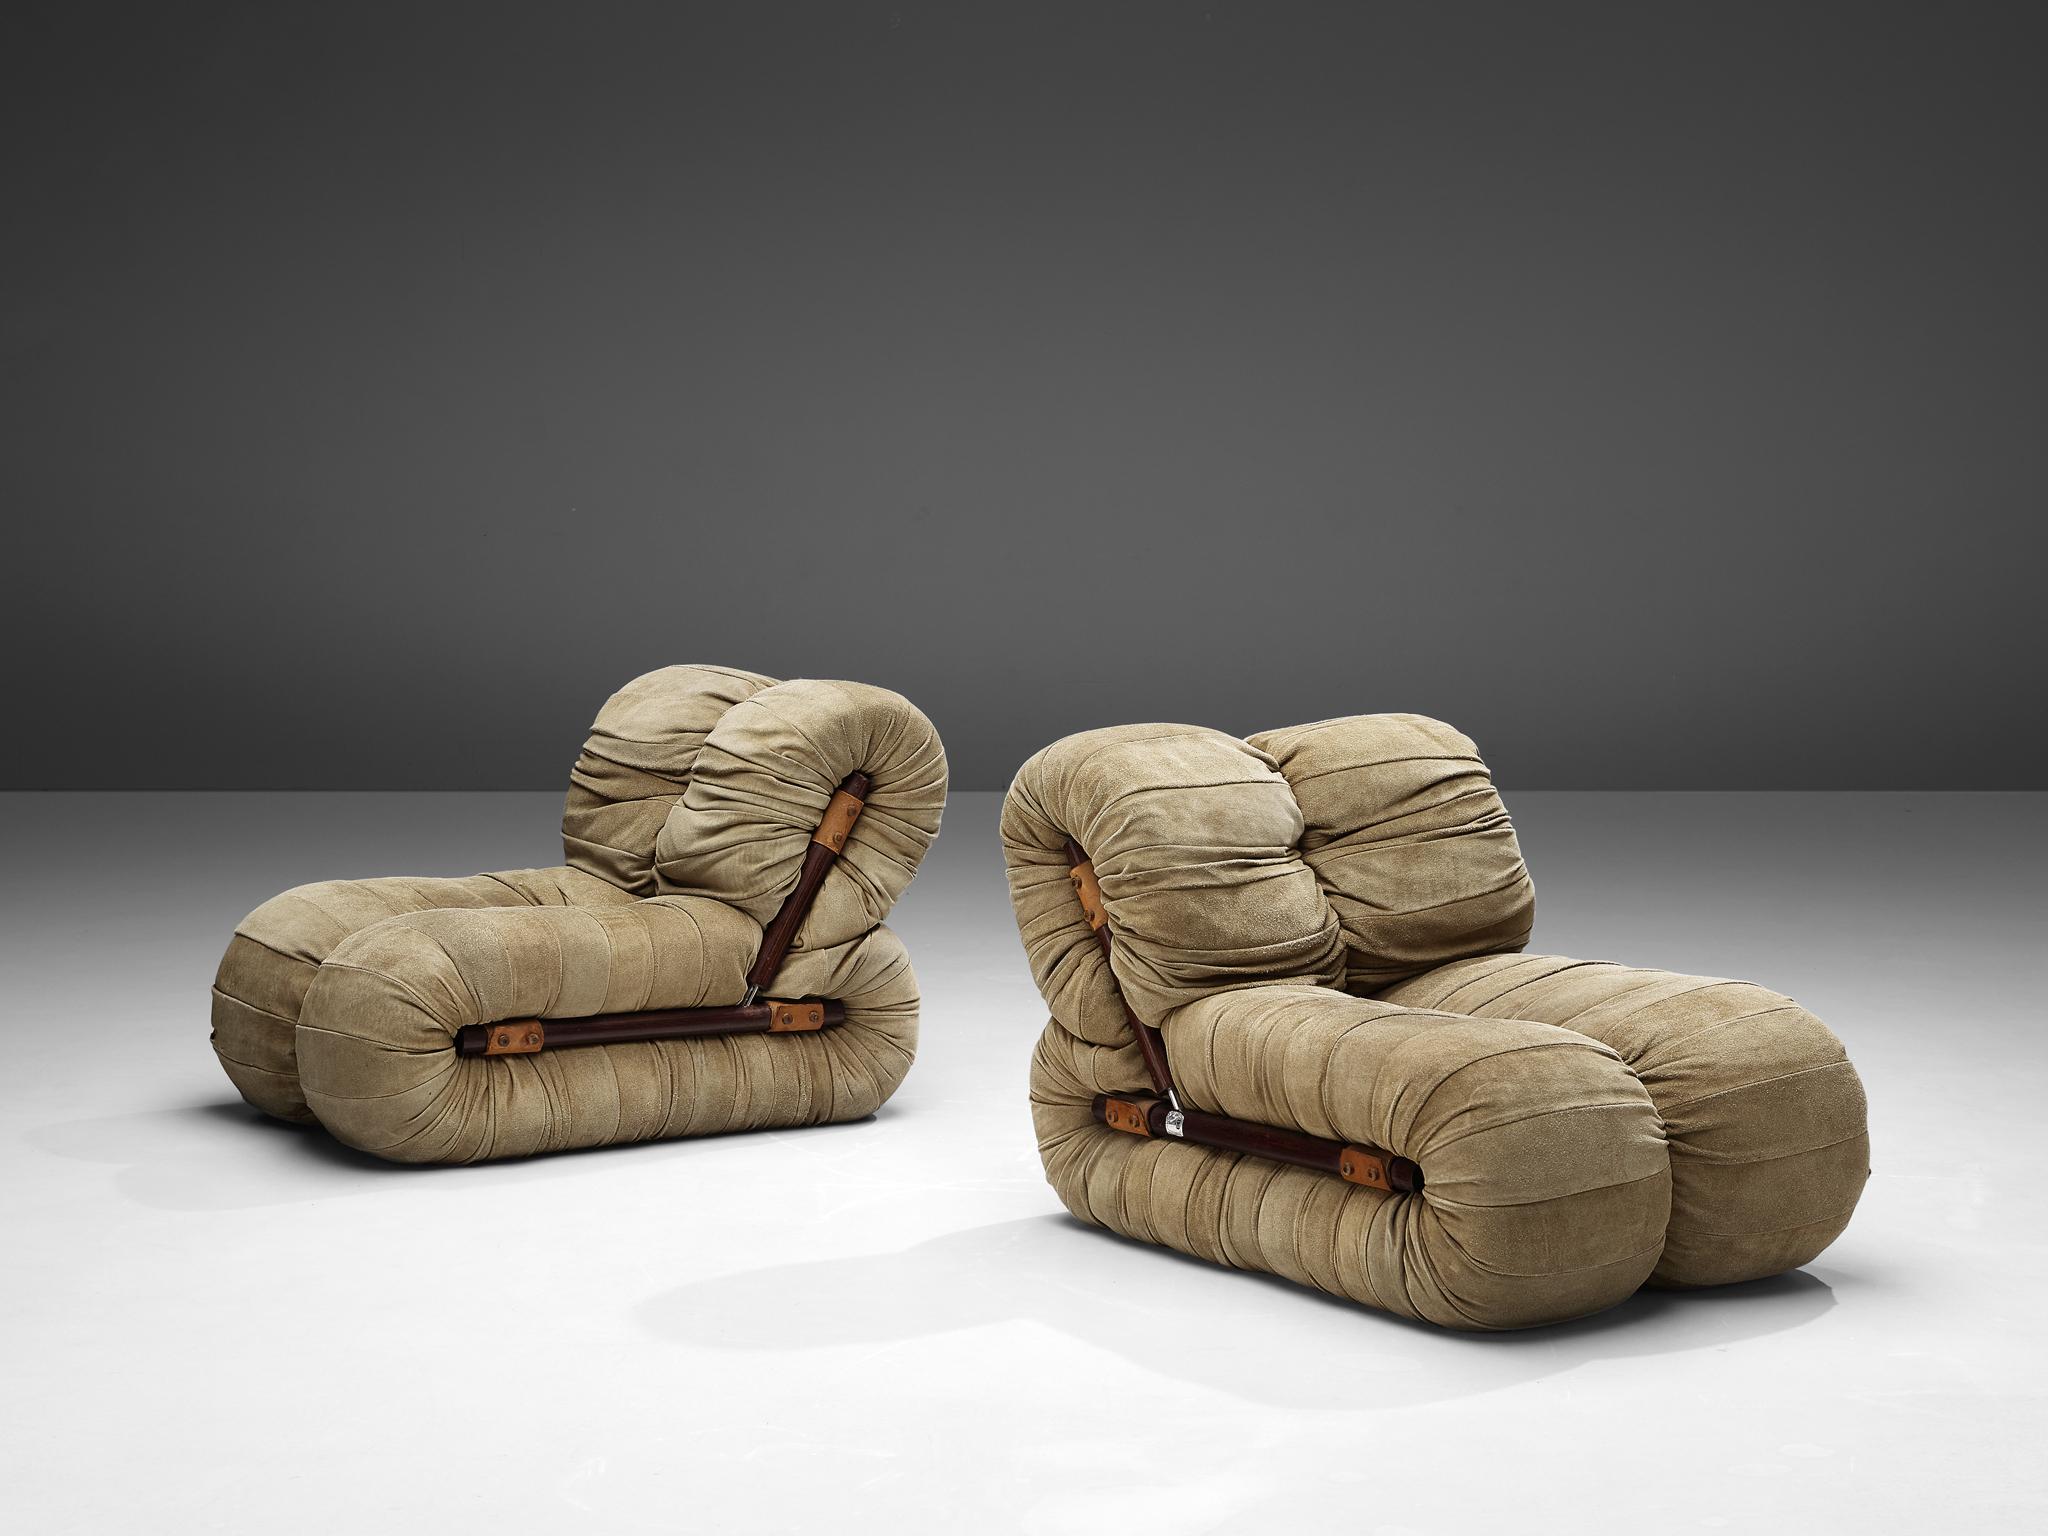 Percival Lafer, lounge chairs, nubuck leather, leather, wood, Brazil, 1960s

Rare lounge chairs designed by the Brazilian designer Percival Lafer during the 1960s. The design is exceptional. Two round shapes each form one lounge chair with a low